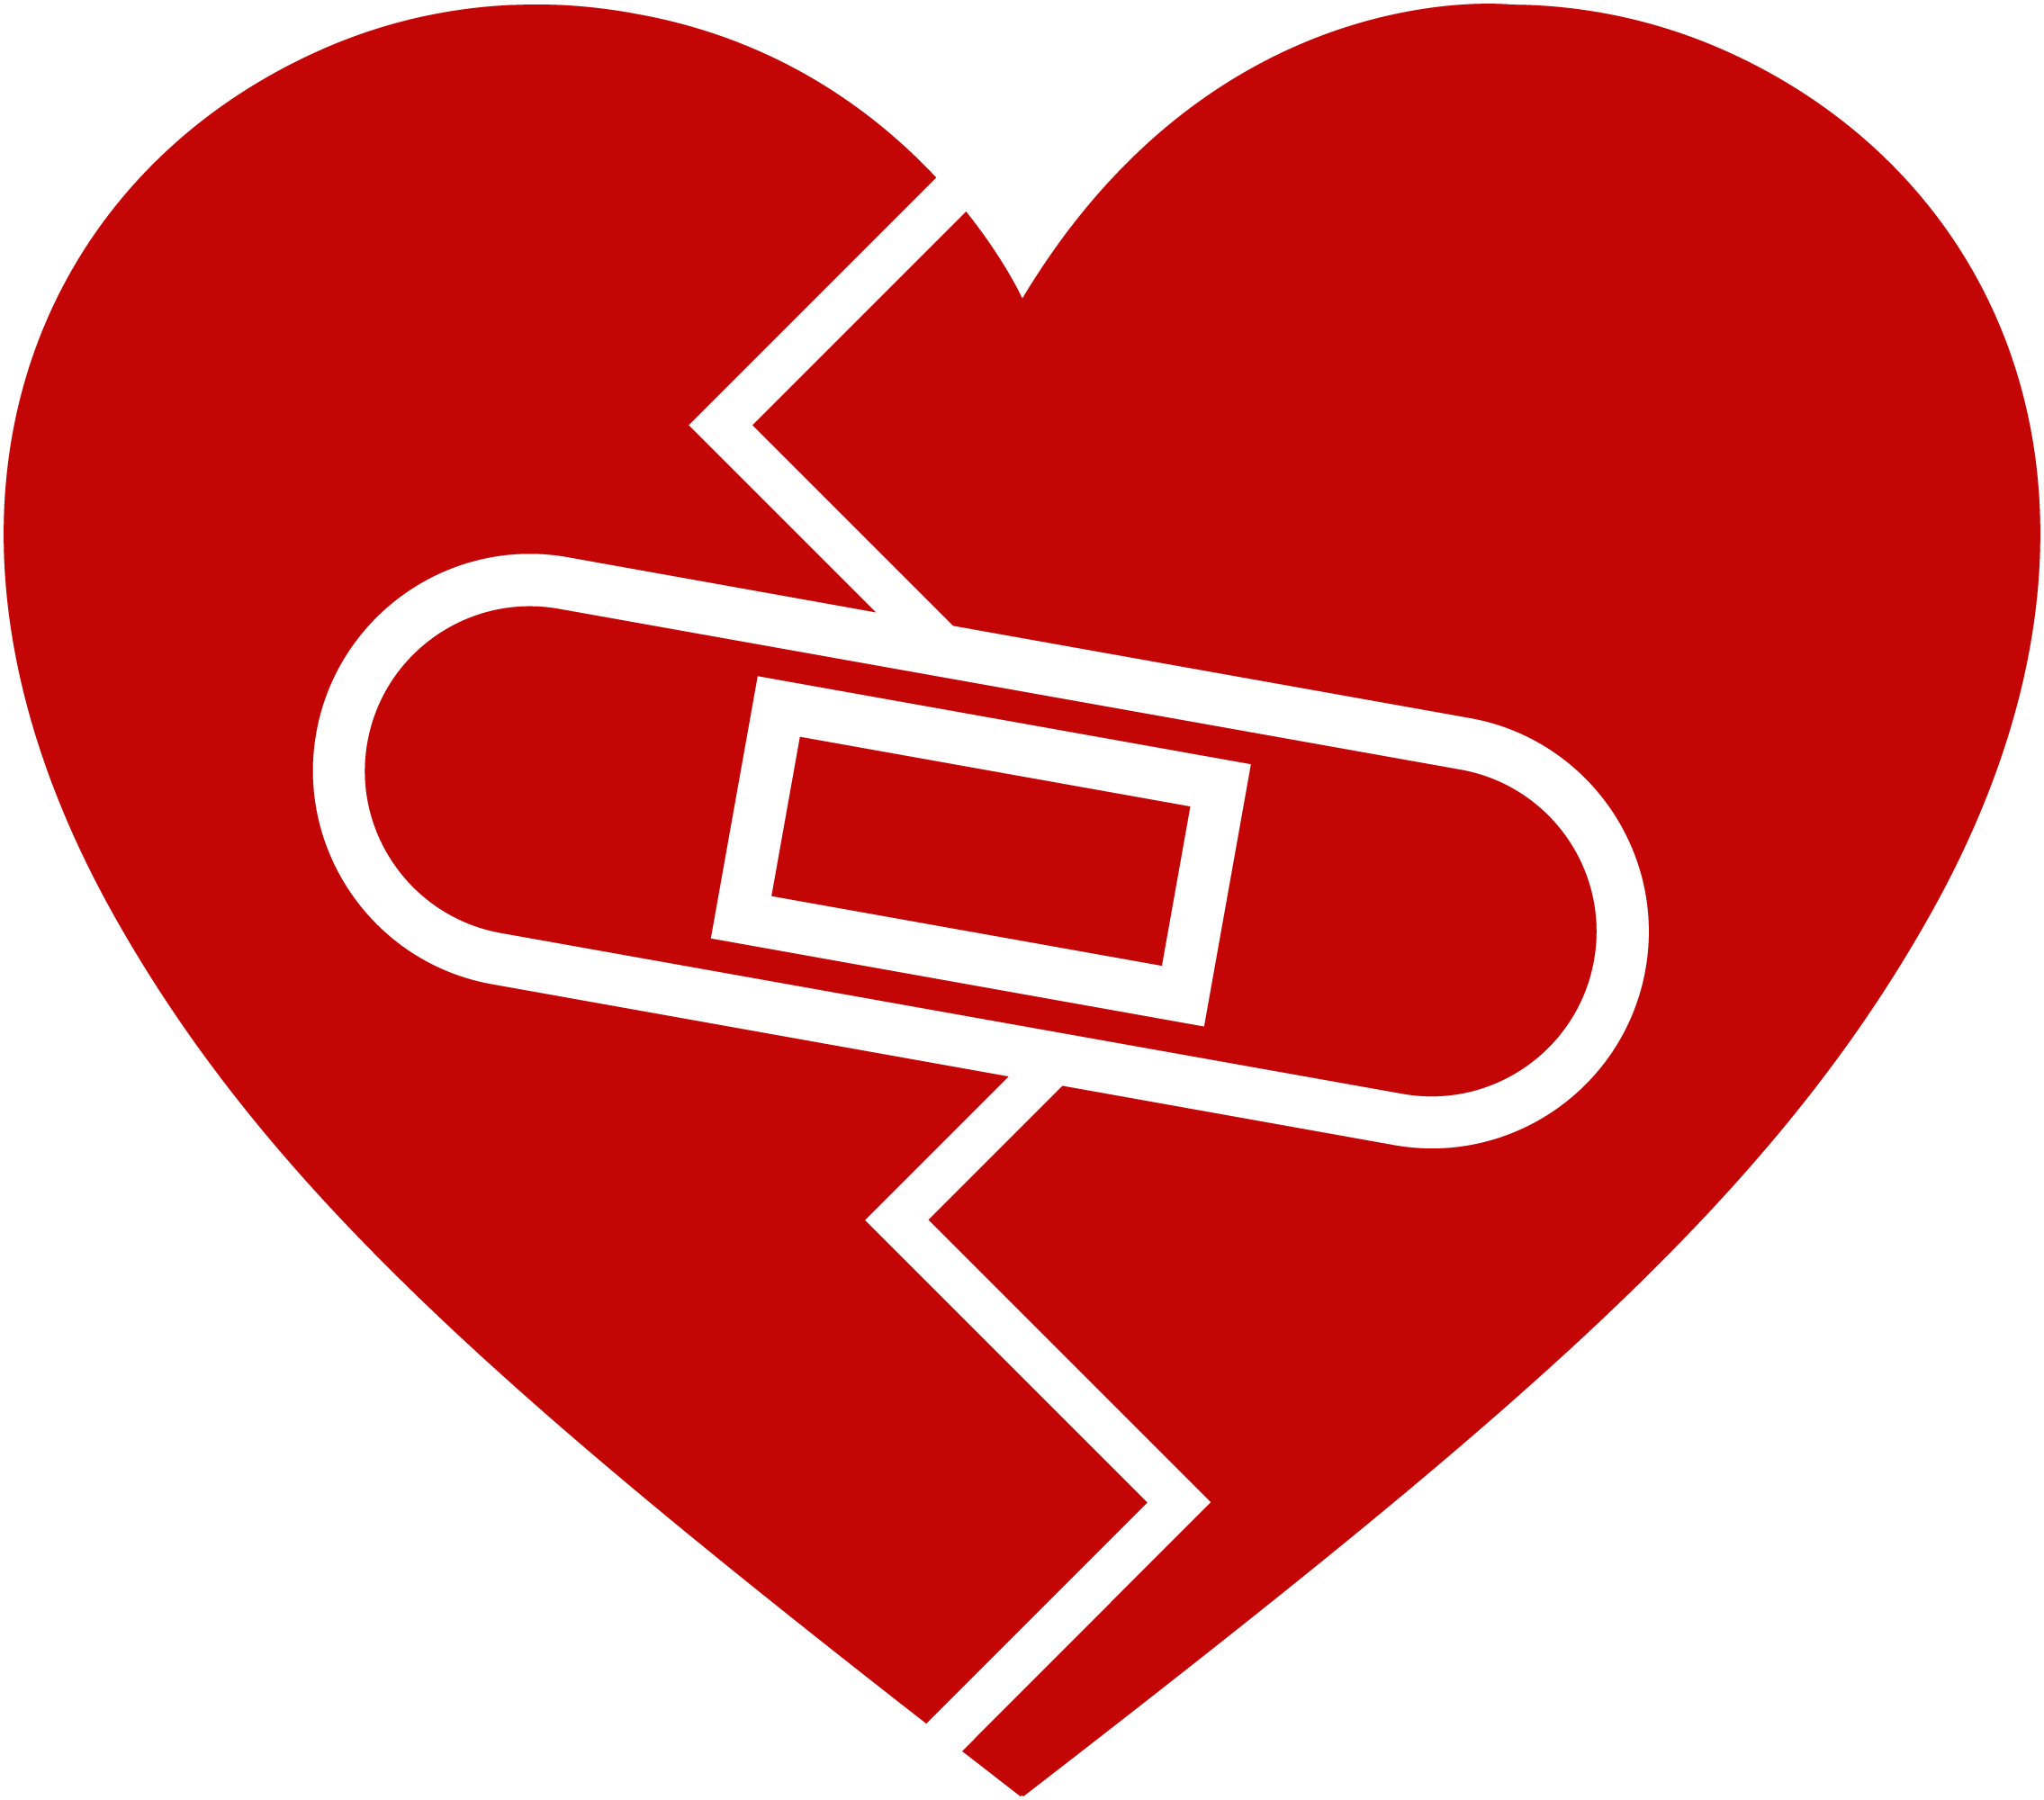 https://www.heart.org/-/media/Images/Health-Topics/Donations-and-Giving/IconHealingAfterHeartbreak.png?h=133&w=150&hash=CE5E4FAED8C3DCA4D125970B5A47CB4B